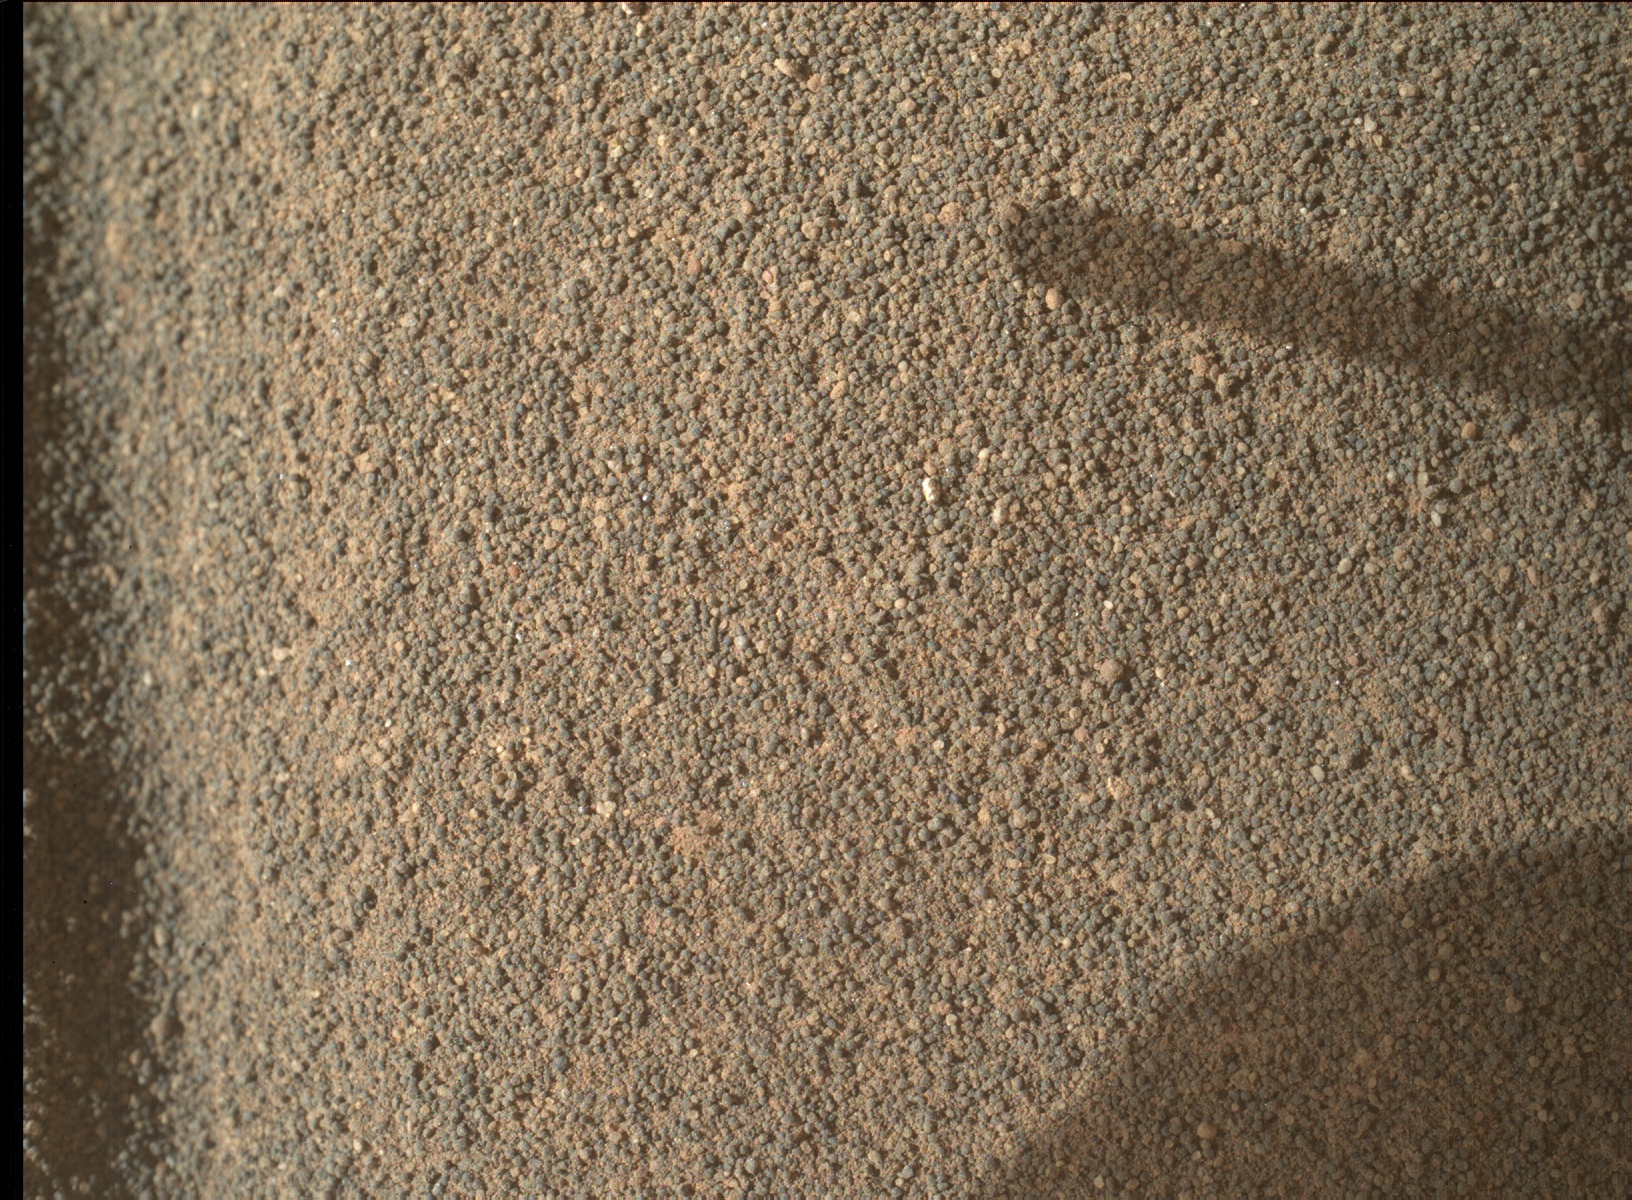 Nasa's Mars rover Curiosity acquired this image using its Mars Hand Lens Imager (MAHLI) on Sol 3447